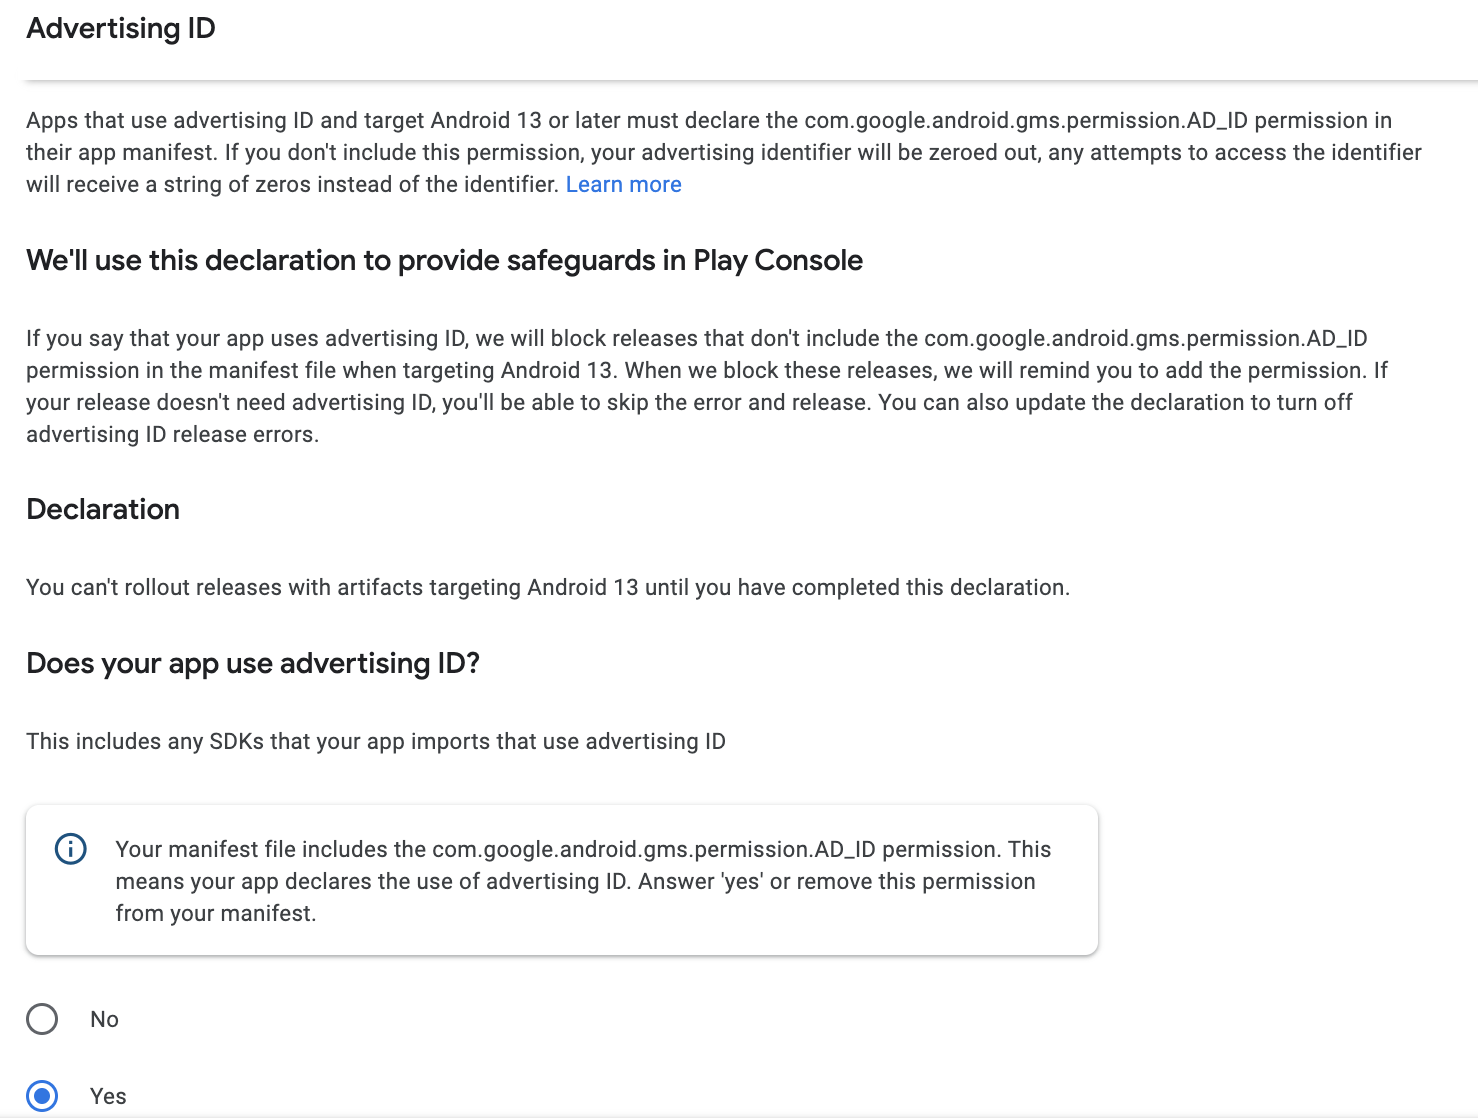 screenshot of ad-id consent in google play advertising-id form in app-content